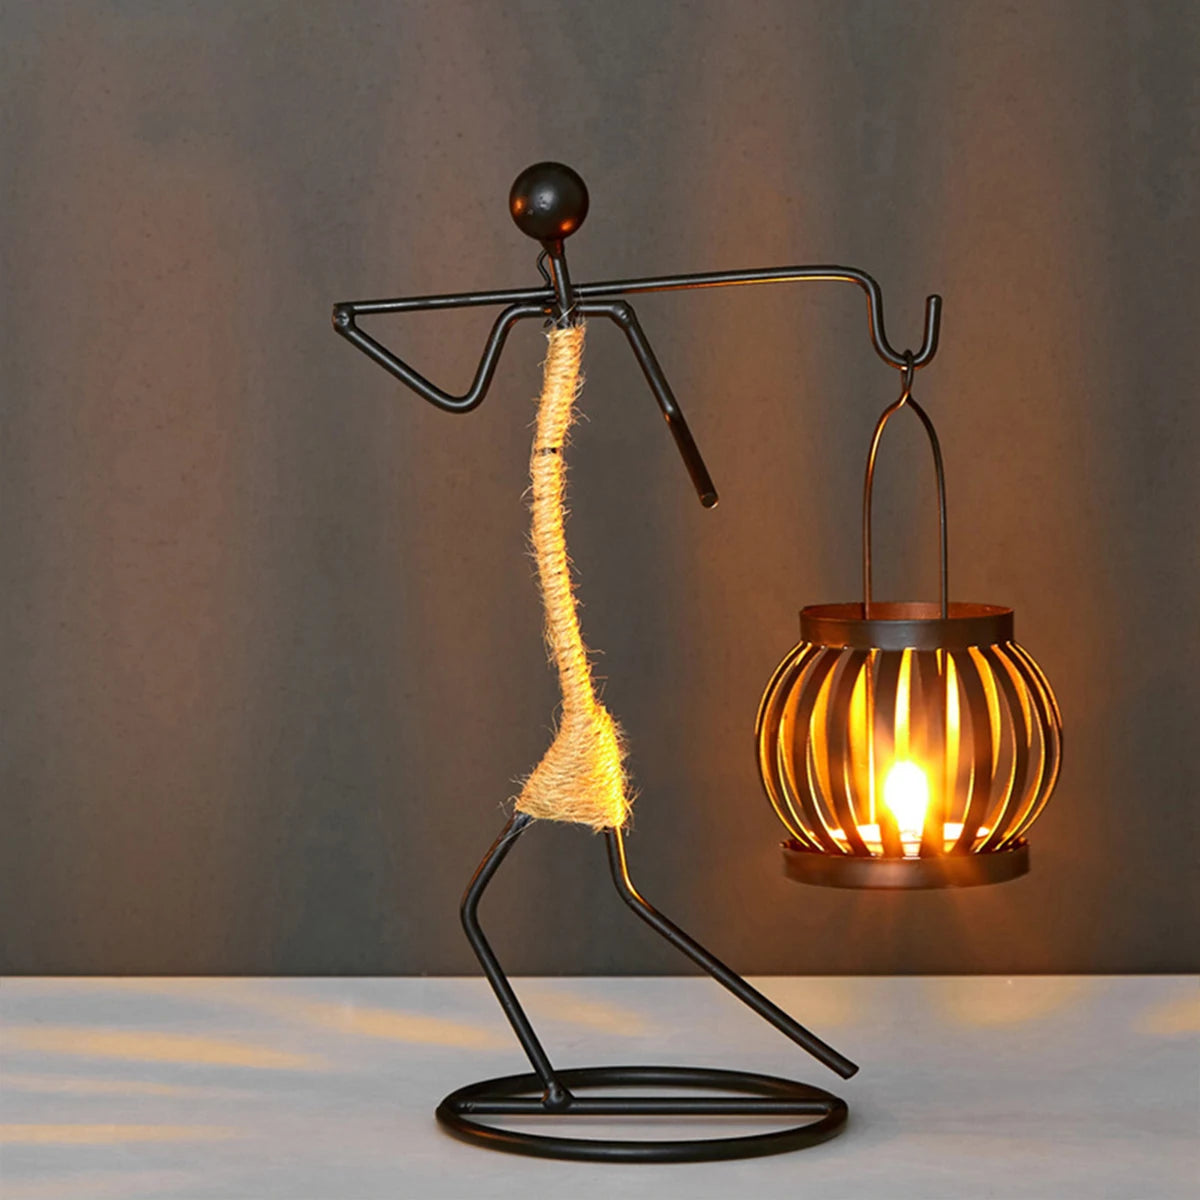 Nordic Creative Metal Candlestick Abstract Character Caradle Holder Music Bar Bar Decorative Small Ornaments Decor Home